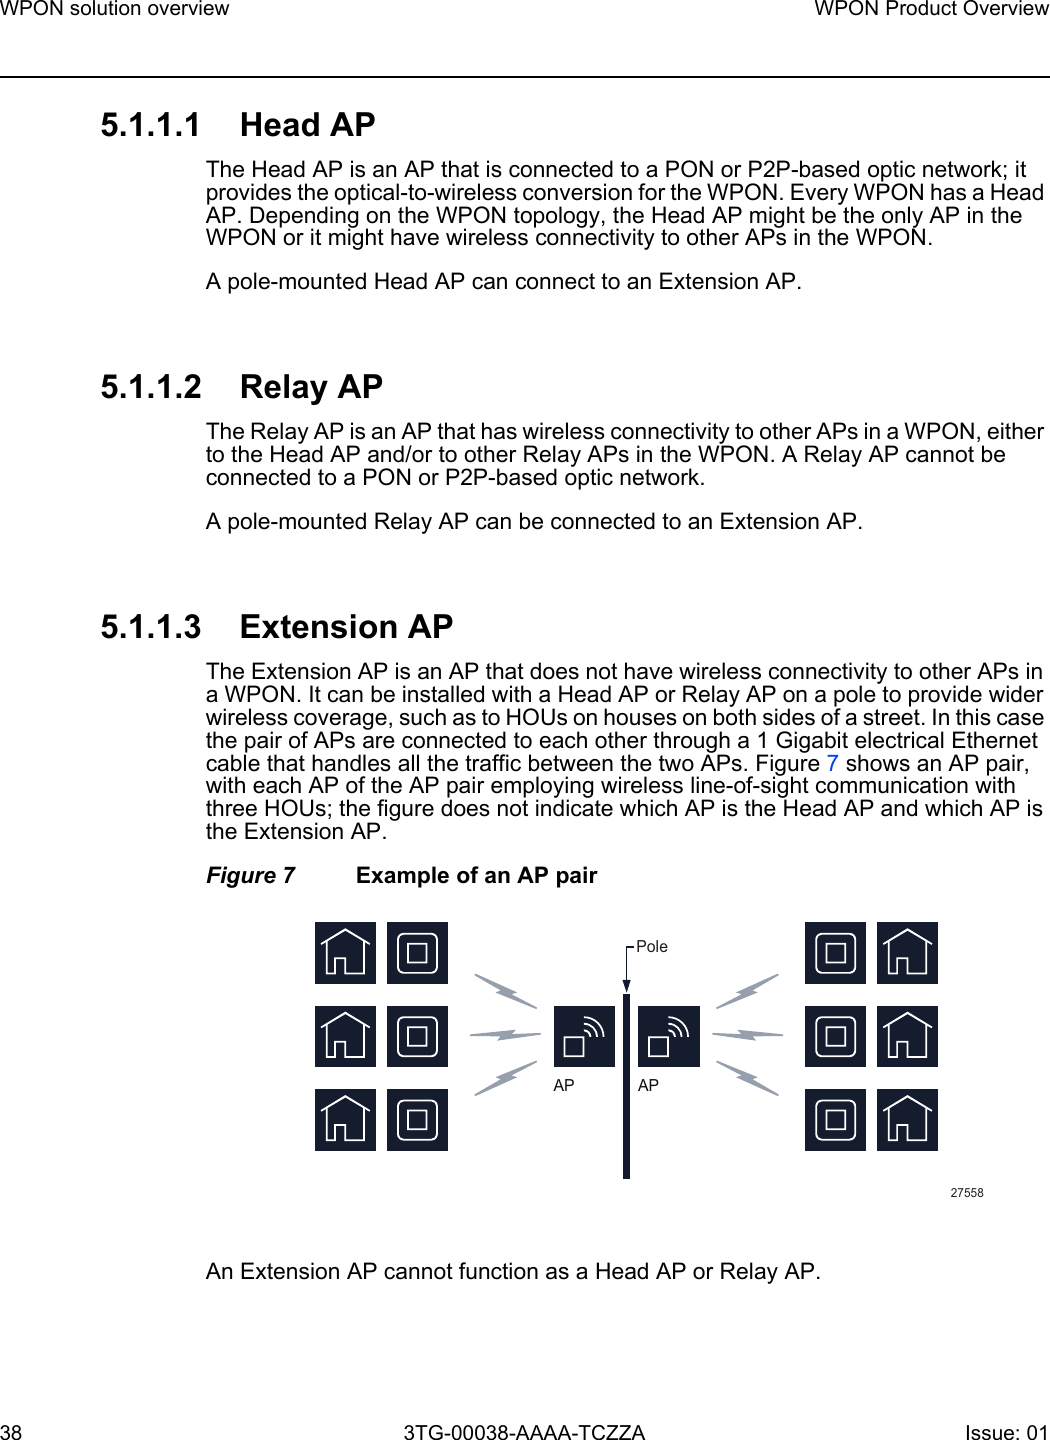 WPON solution overview38WPON Product Overview3TG-00038-AAAA-TCZZA Issue: 01 5.1.1.1 Head APThe Head AP is an AP that is connected to a PON or P2P-based optic network; it provides the optical-to-wireless conversion for the WPON. Every WPON has a Head AP. Depending on the WPON topology, the Head AP might be the only AP in the WPON or it might have wireless connectivity to other APs in the WPON. A pole-mounted Head AP can connect to an Extension AP.5.1.1.2 Relay APThe Relay AP is an AP that has wireless connectivity to other APs in a WPON, either to the Head AP and/or to other Relay APs in the WPON. A Relay AP cannot be connected to a PON or P2P-based optic network. A pole-mounted Relay AP can be connected to an Extension AP.5.1.1.3 Extension APThe Extension AP is an AP that does not have wireless connectivity to other APs in a WPON. It can be installed with a Head AP or Relay AP on a pole to provide wider wireless coverage, such as to HOUs on houses on both sides of a street. In this case the pair of APs are connected to each other through a 1 Gigabit electrical Ethernet cable that handles all the traffic between the two APs. Figure 7 shows an AP pair, with each AP of the AP pair employing wireless line-of-sight communication with three HOUs; the figure does not indicate which AP is the Head AP and which AP is the Extension AP.Figure 7 Example of an AP pairAn Extension AP cannot function as a Head AP or Relay AP.27558PoleAP AP